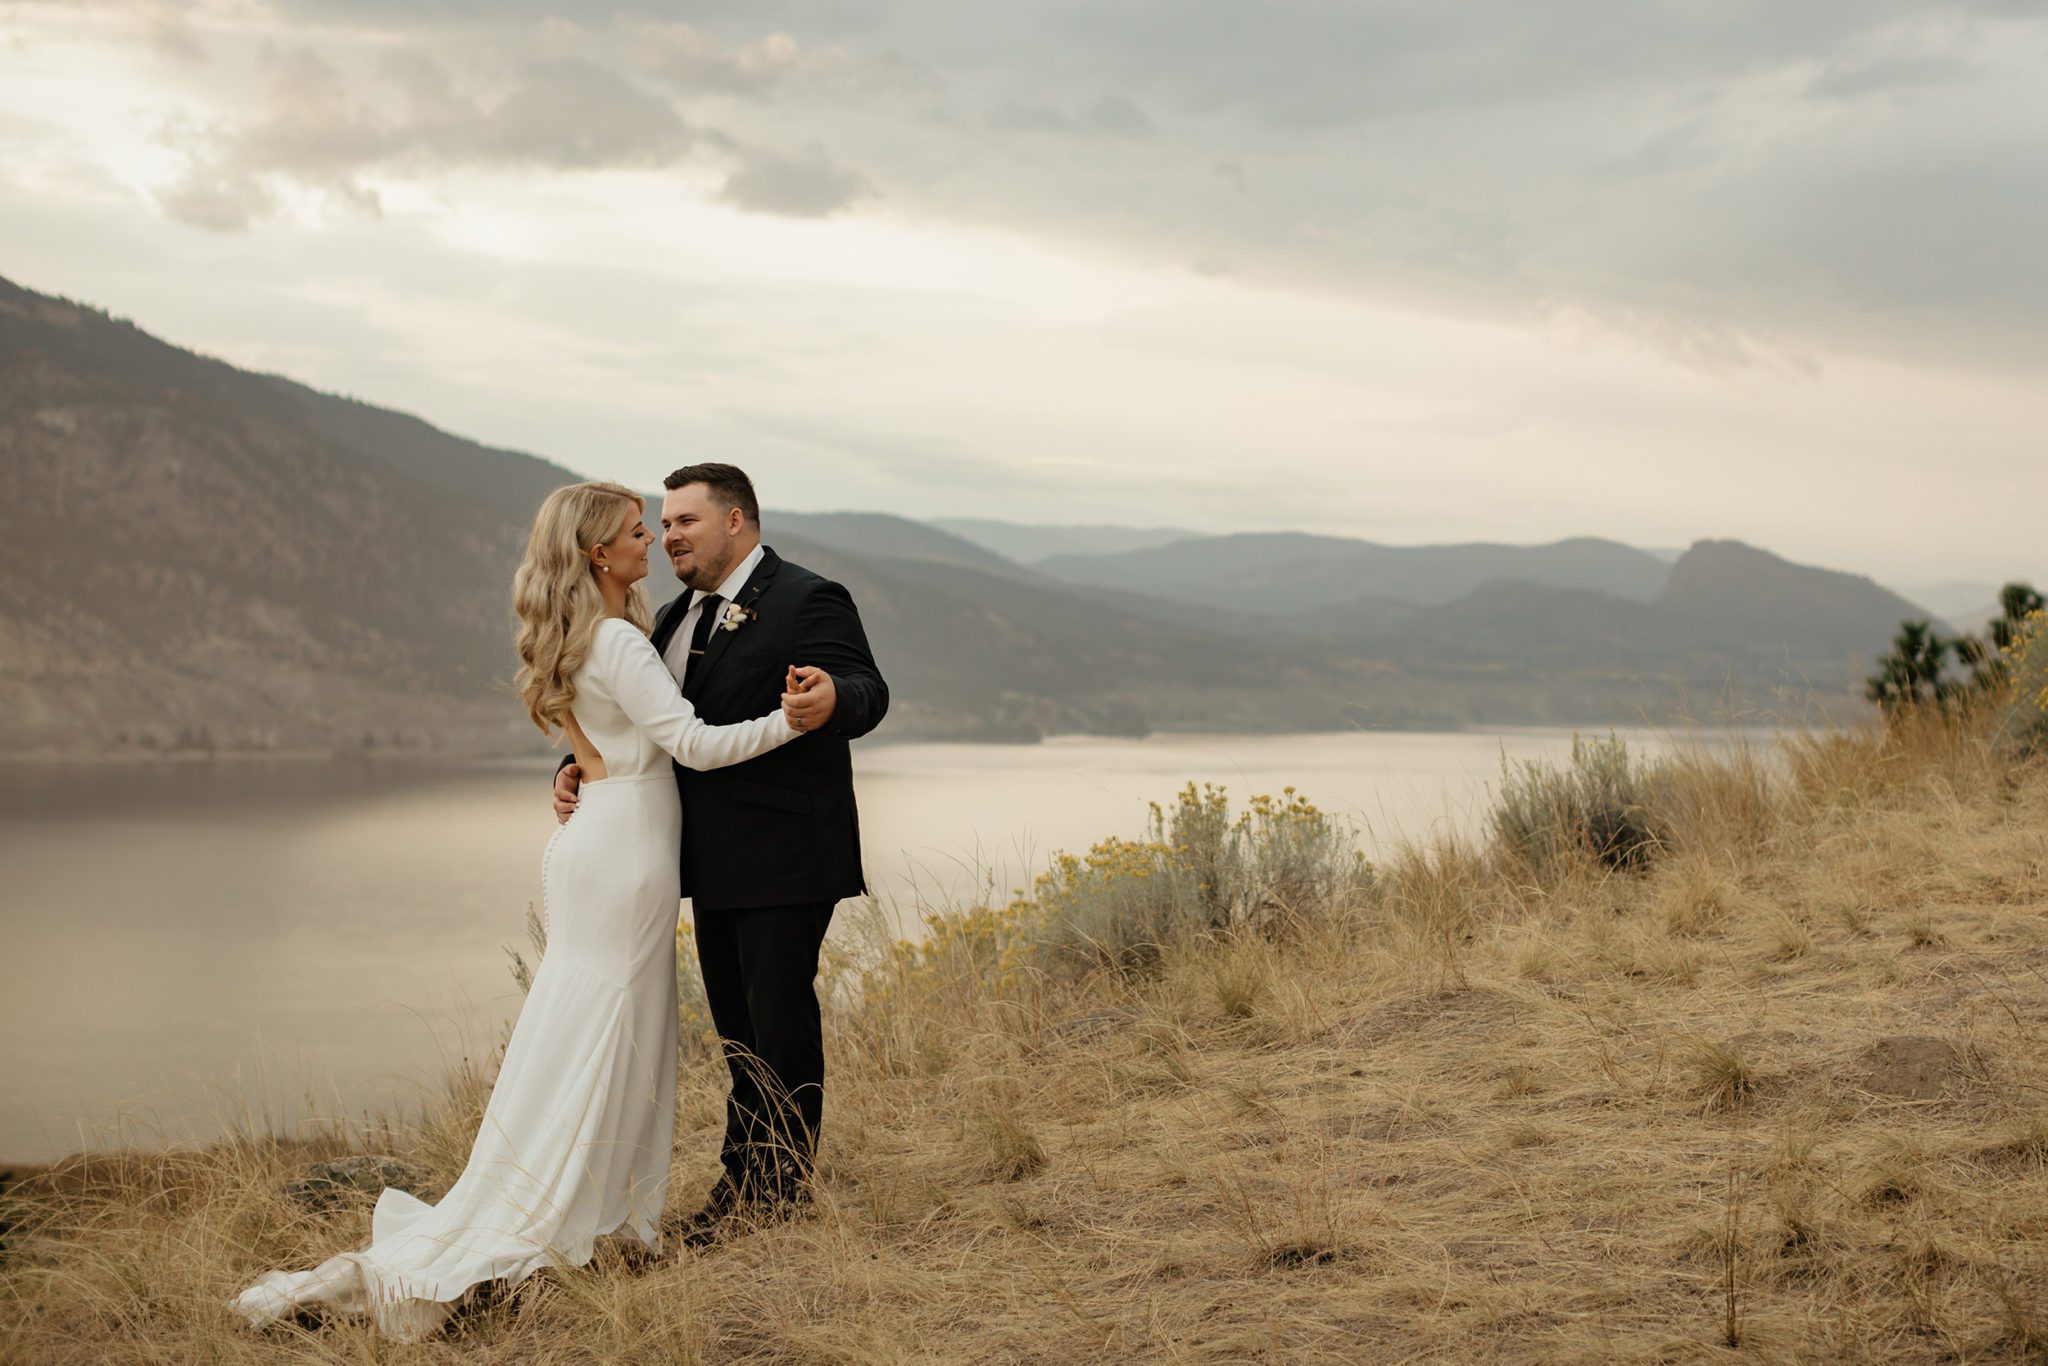 Bride and groom share a first dance overlooking the Okanagan Valley